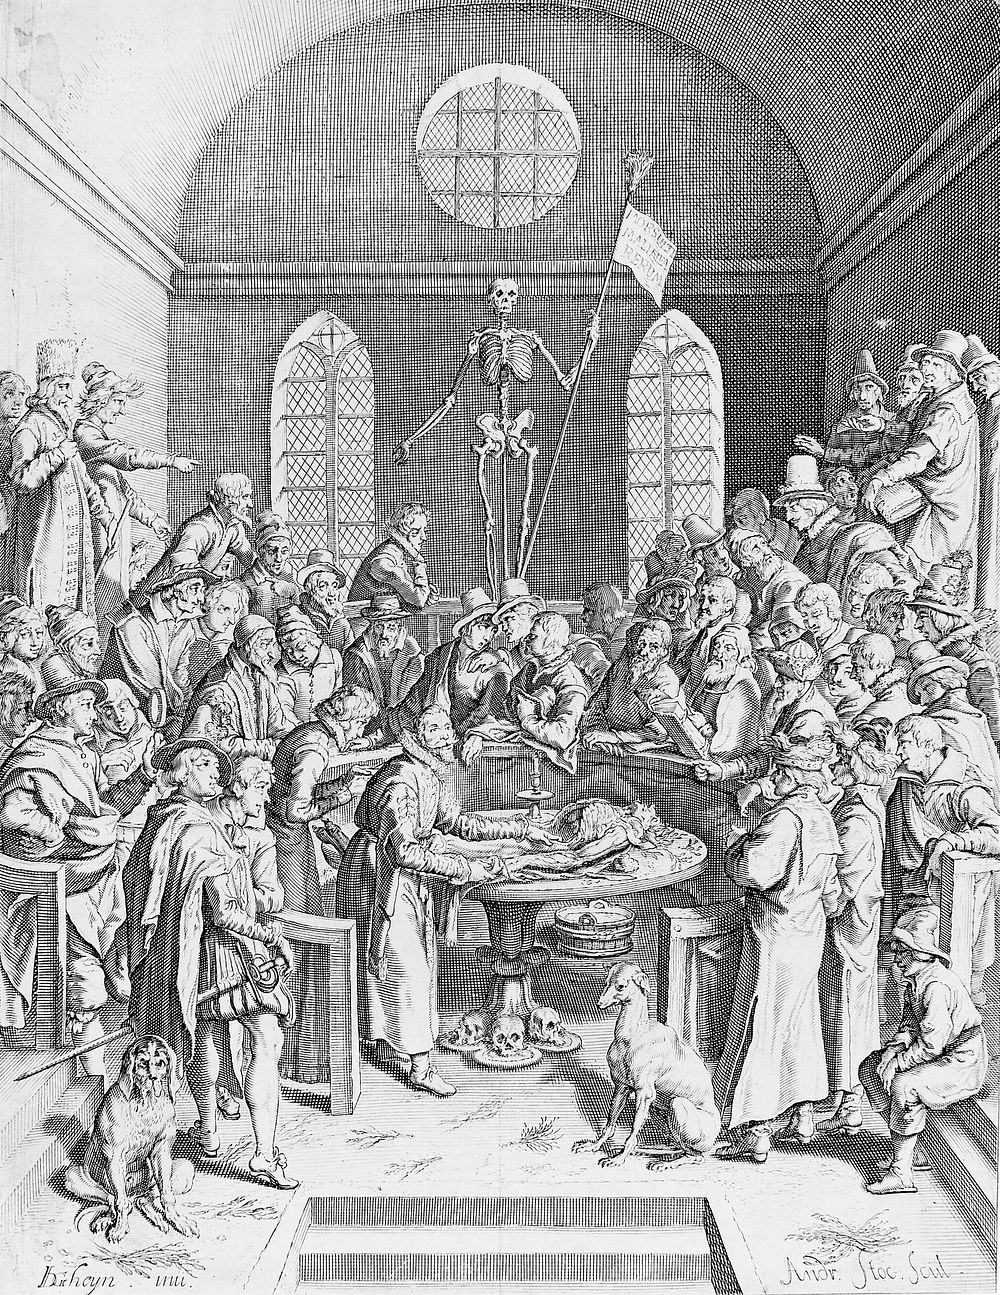 An anatomical dissection by Pieter Pauw in the Leiden anatomy theatre. Engraving by Andries Stock after a drawing by Jacques…